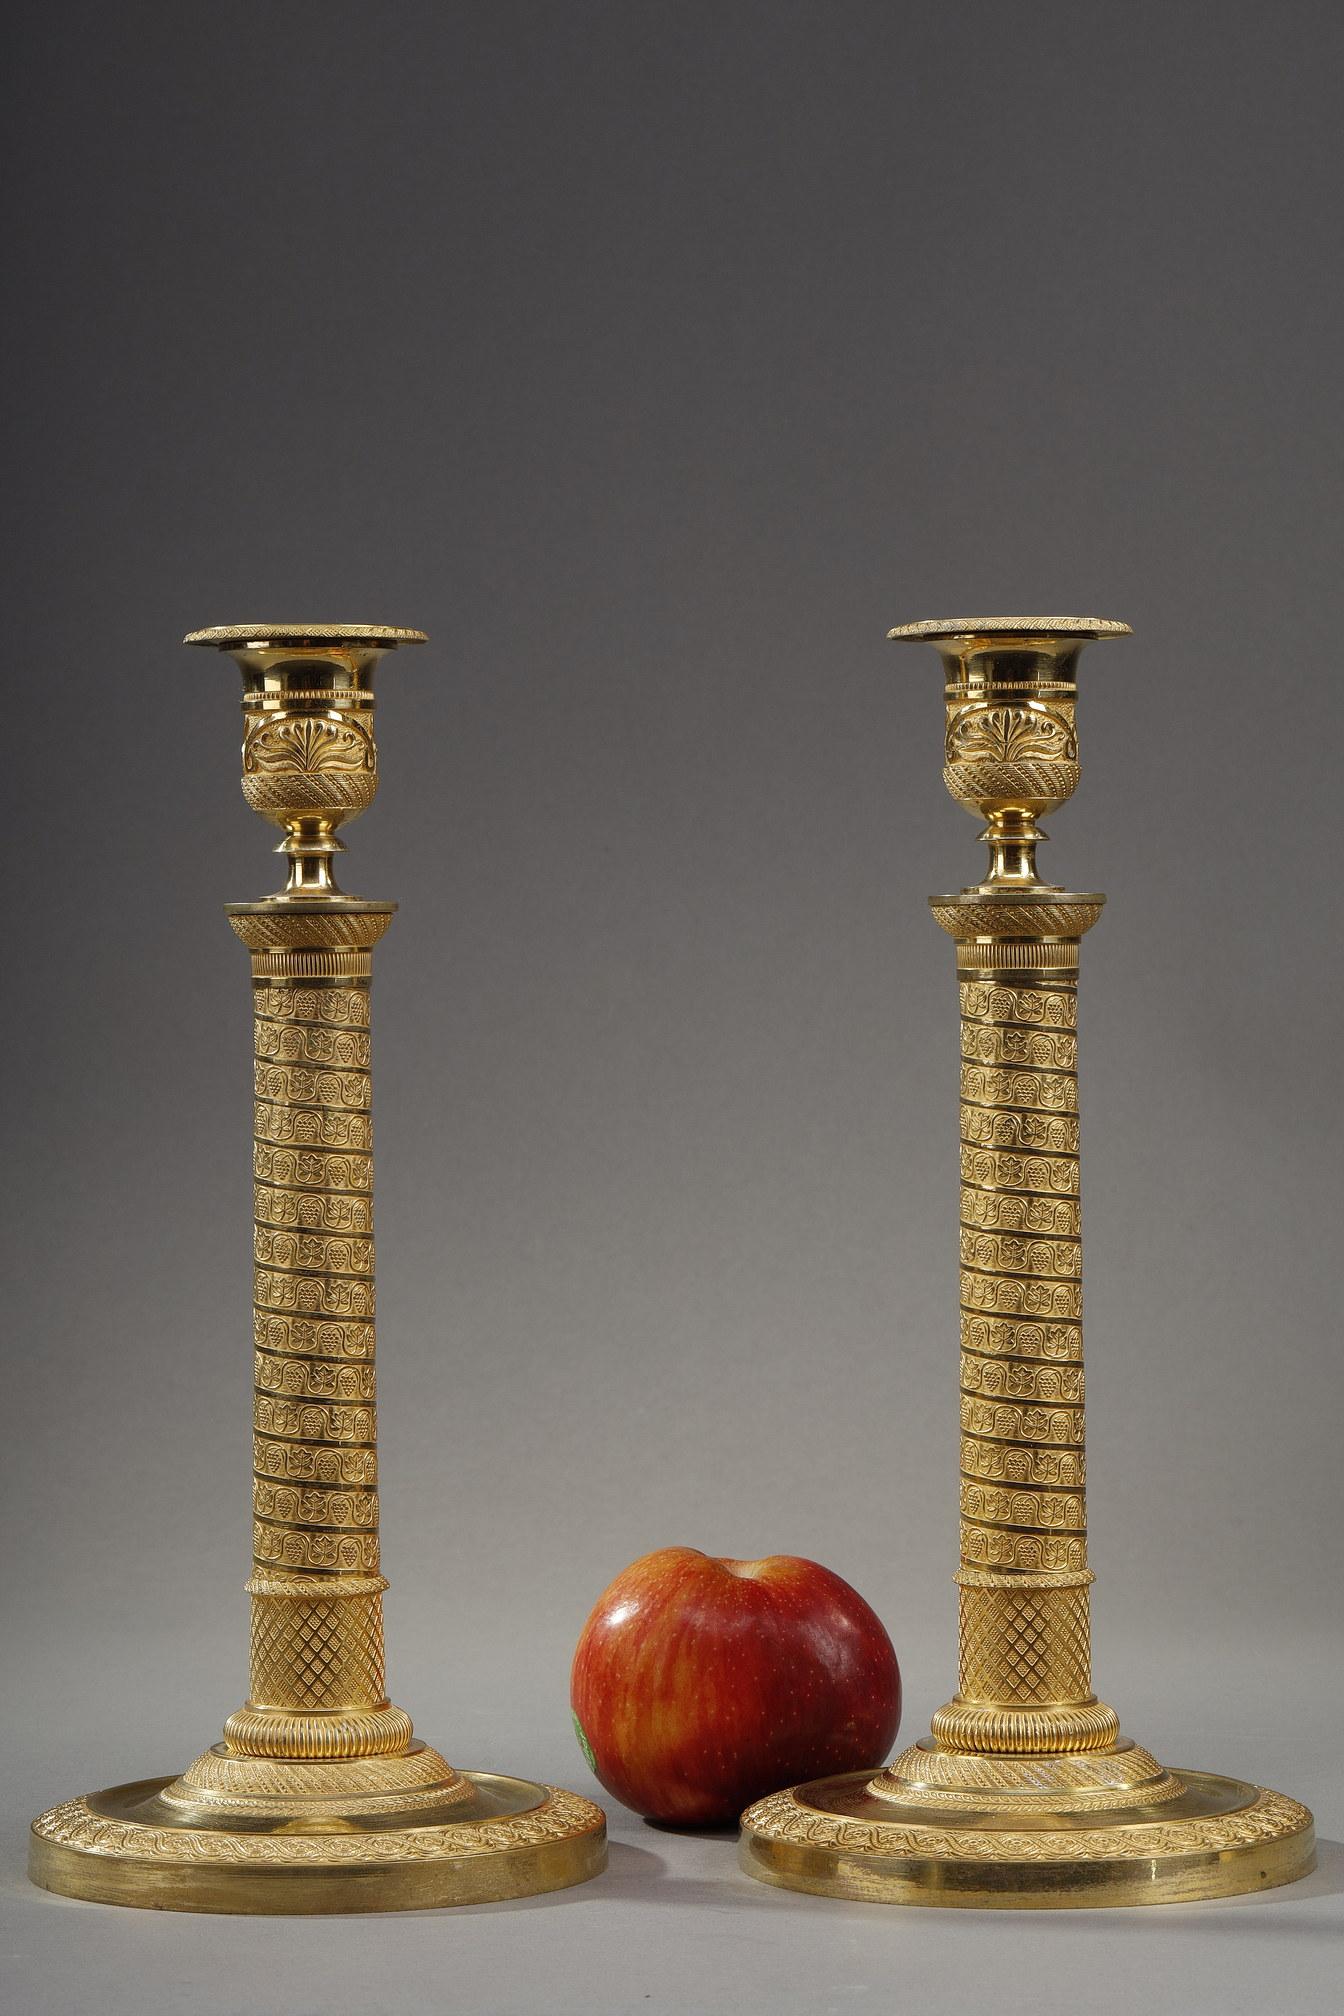 Pair of candlesticks from the Restoration period in chased and gilded bronze with a shaft in the shape of columns whose decoration of vine bulbs scrolls around in a spiral. The circular base is decorated with a crown of laurels, interlacings and